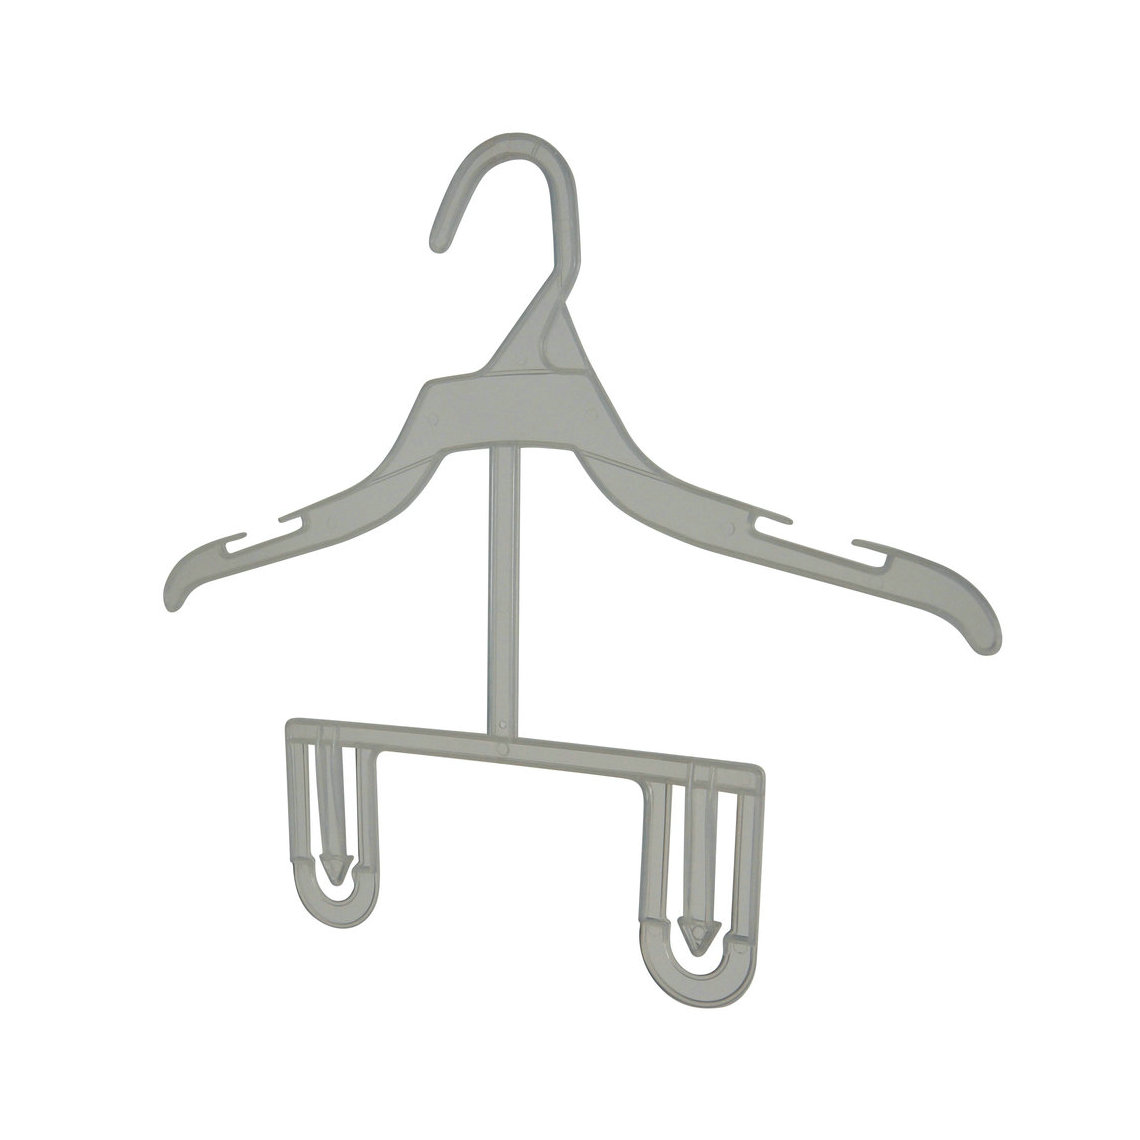 Lightweight double clothes hanger for drying babies clothes